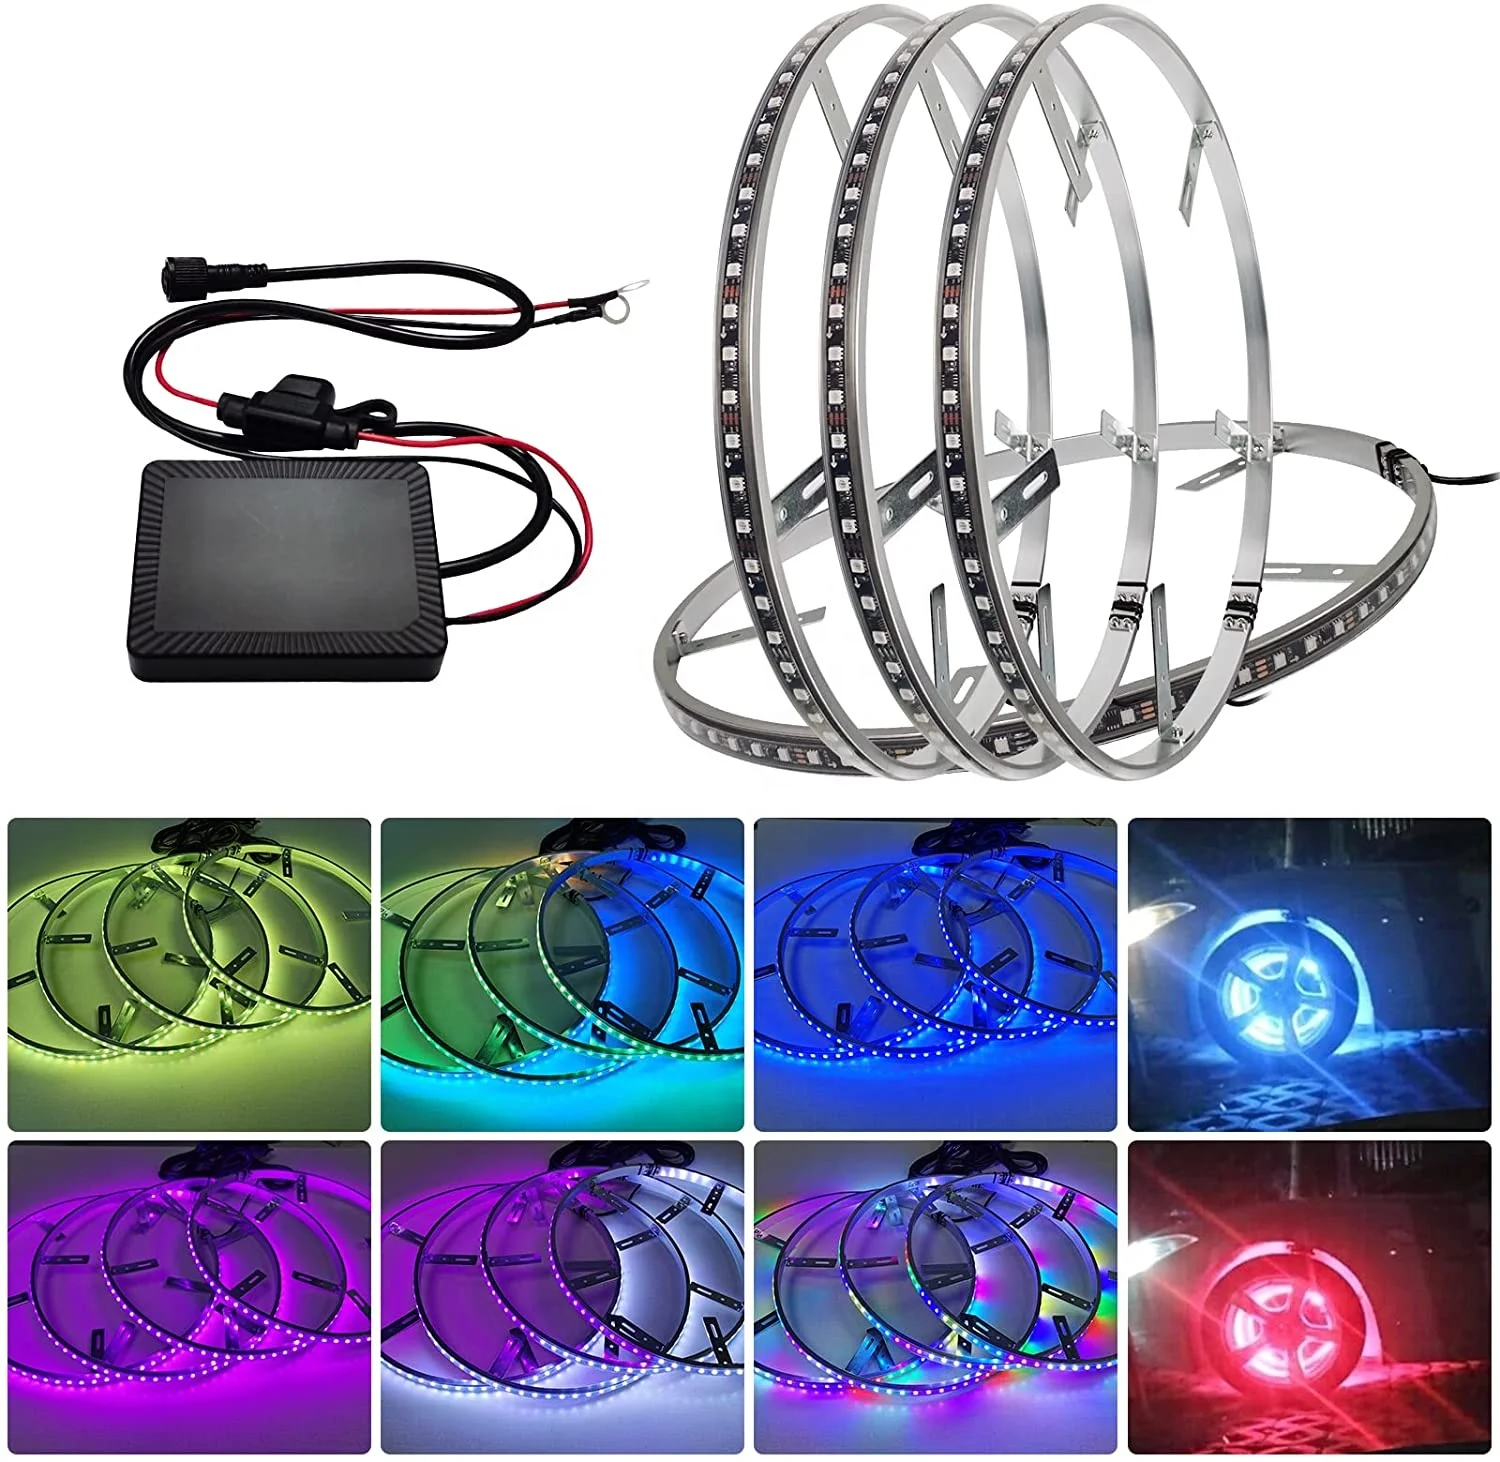 

4PC 17'' RGBW LED Wheel Rim Light 312 Led Car with BT Controller Box IP68 Truck Auto ing System